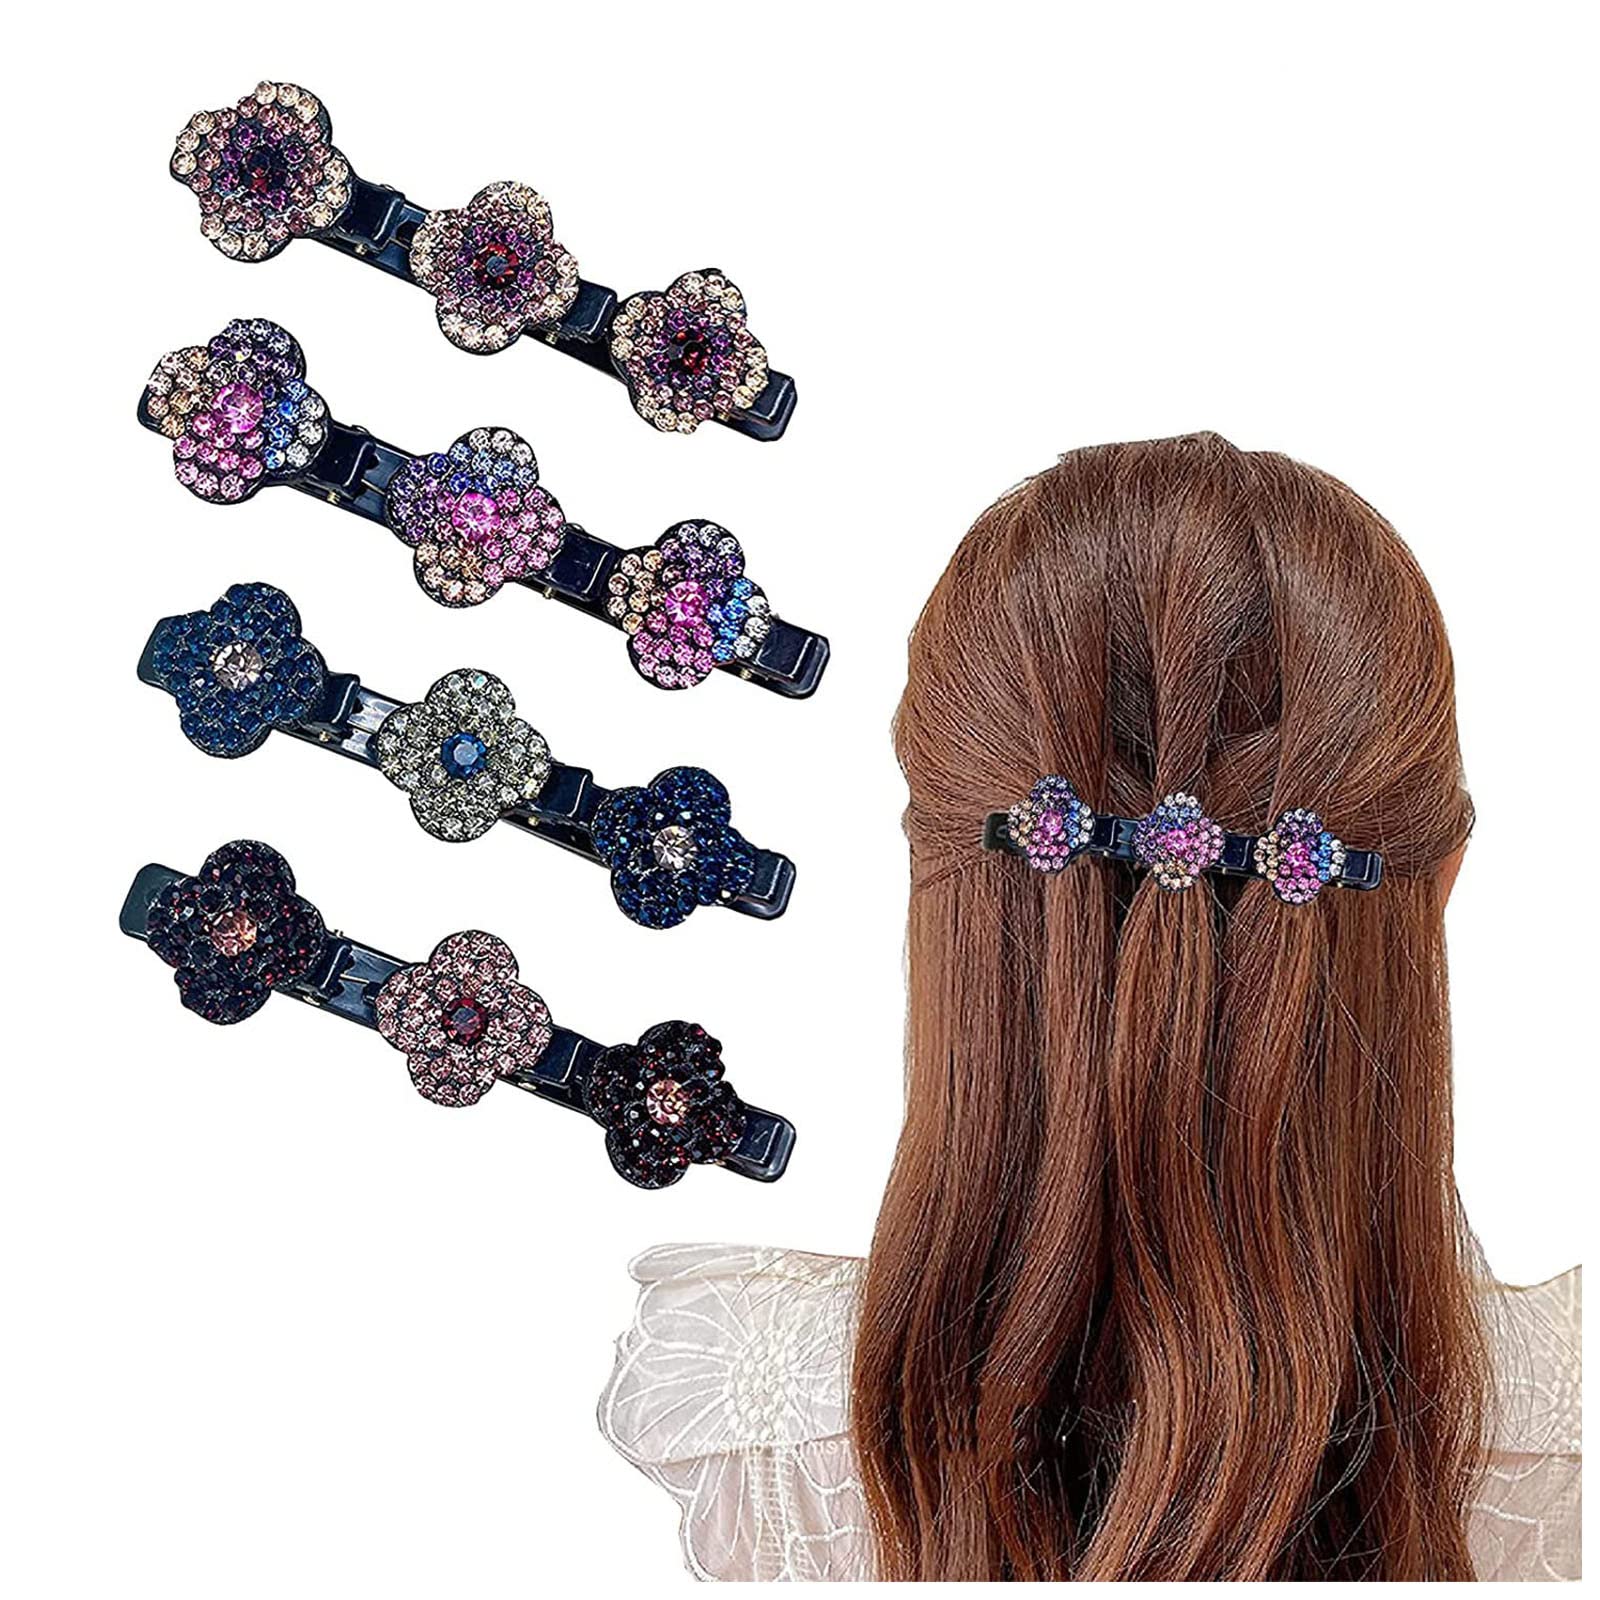 Braided Hair Clips for Women Girls, 6Pcs Satin Fabric Hair Bands with 3  Small Clips, Rsvelte Hair Clips with Butterfly for Sectioning,Triple  Braided